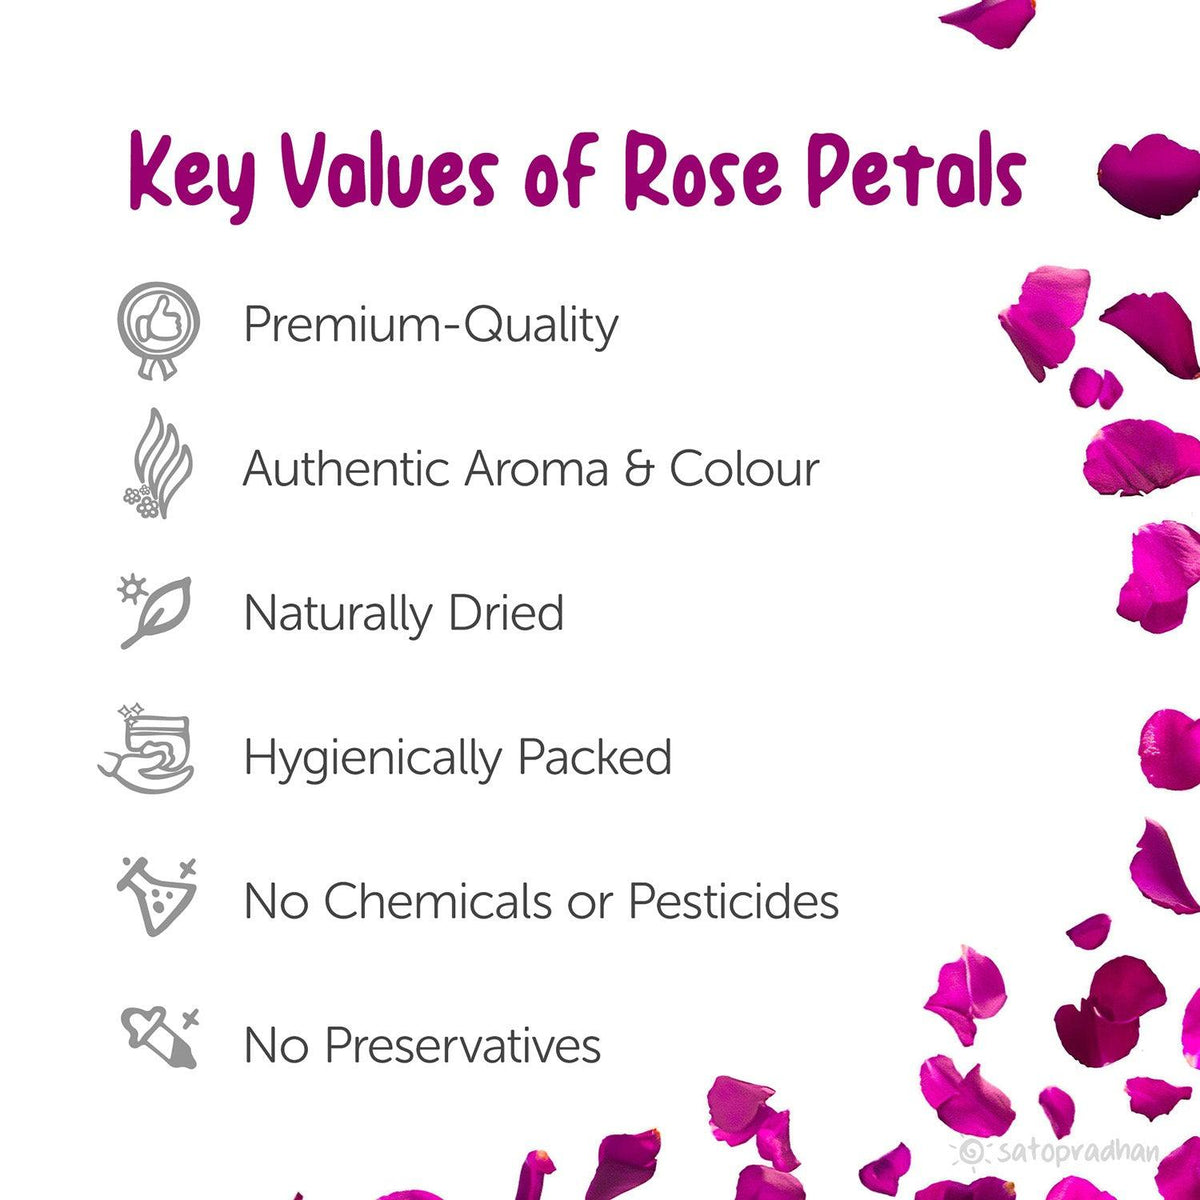 Rose Petals Dried 50g - Pure & Natural Edible Flower - Organically Grown Shade Dried petals without Chemicals